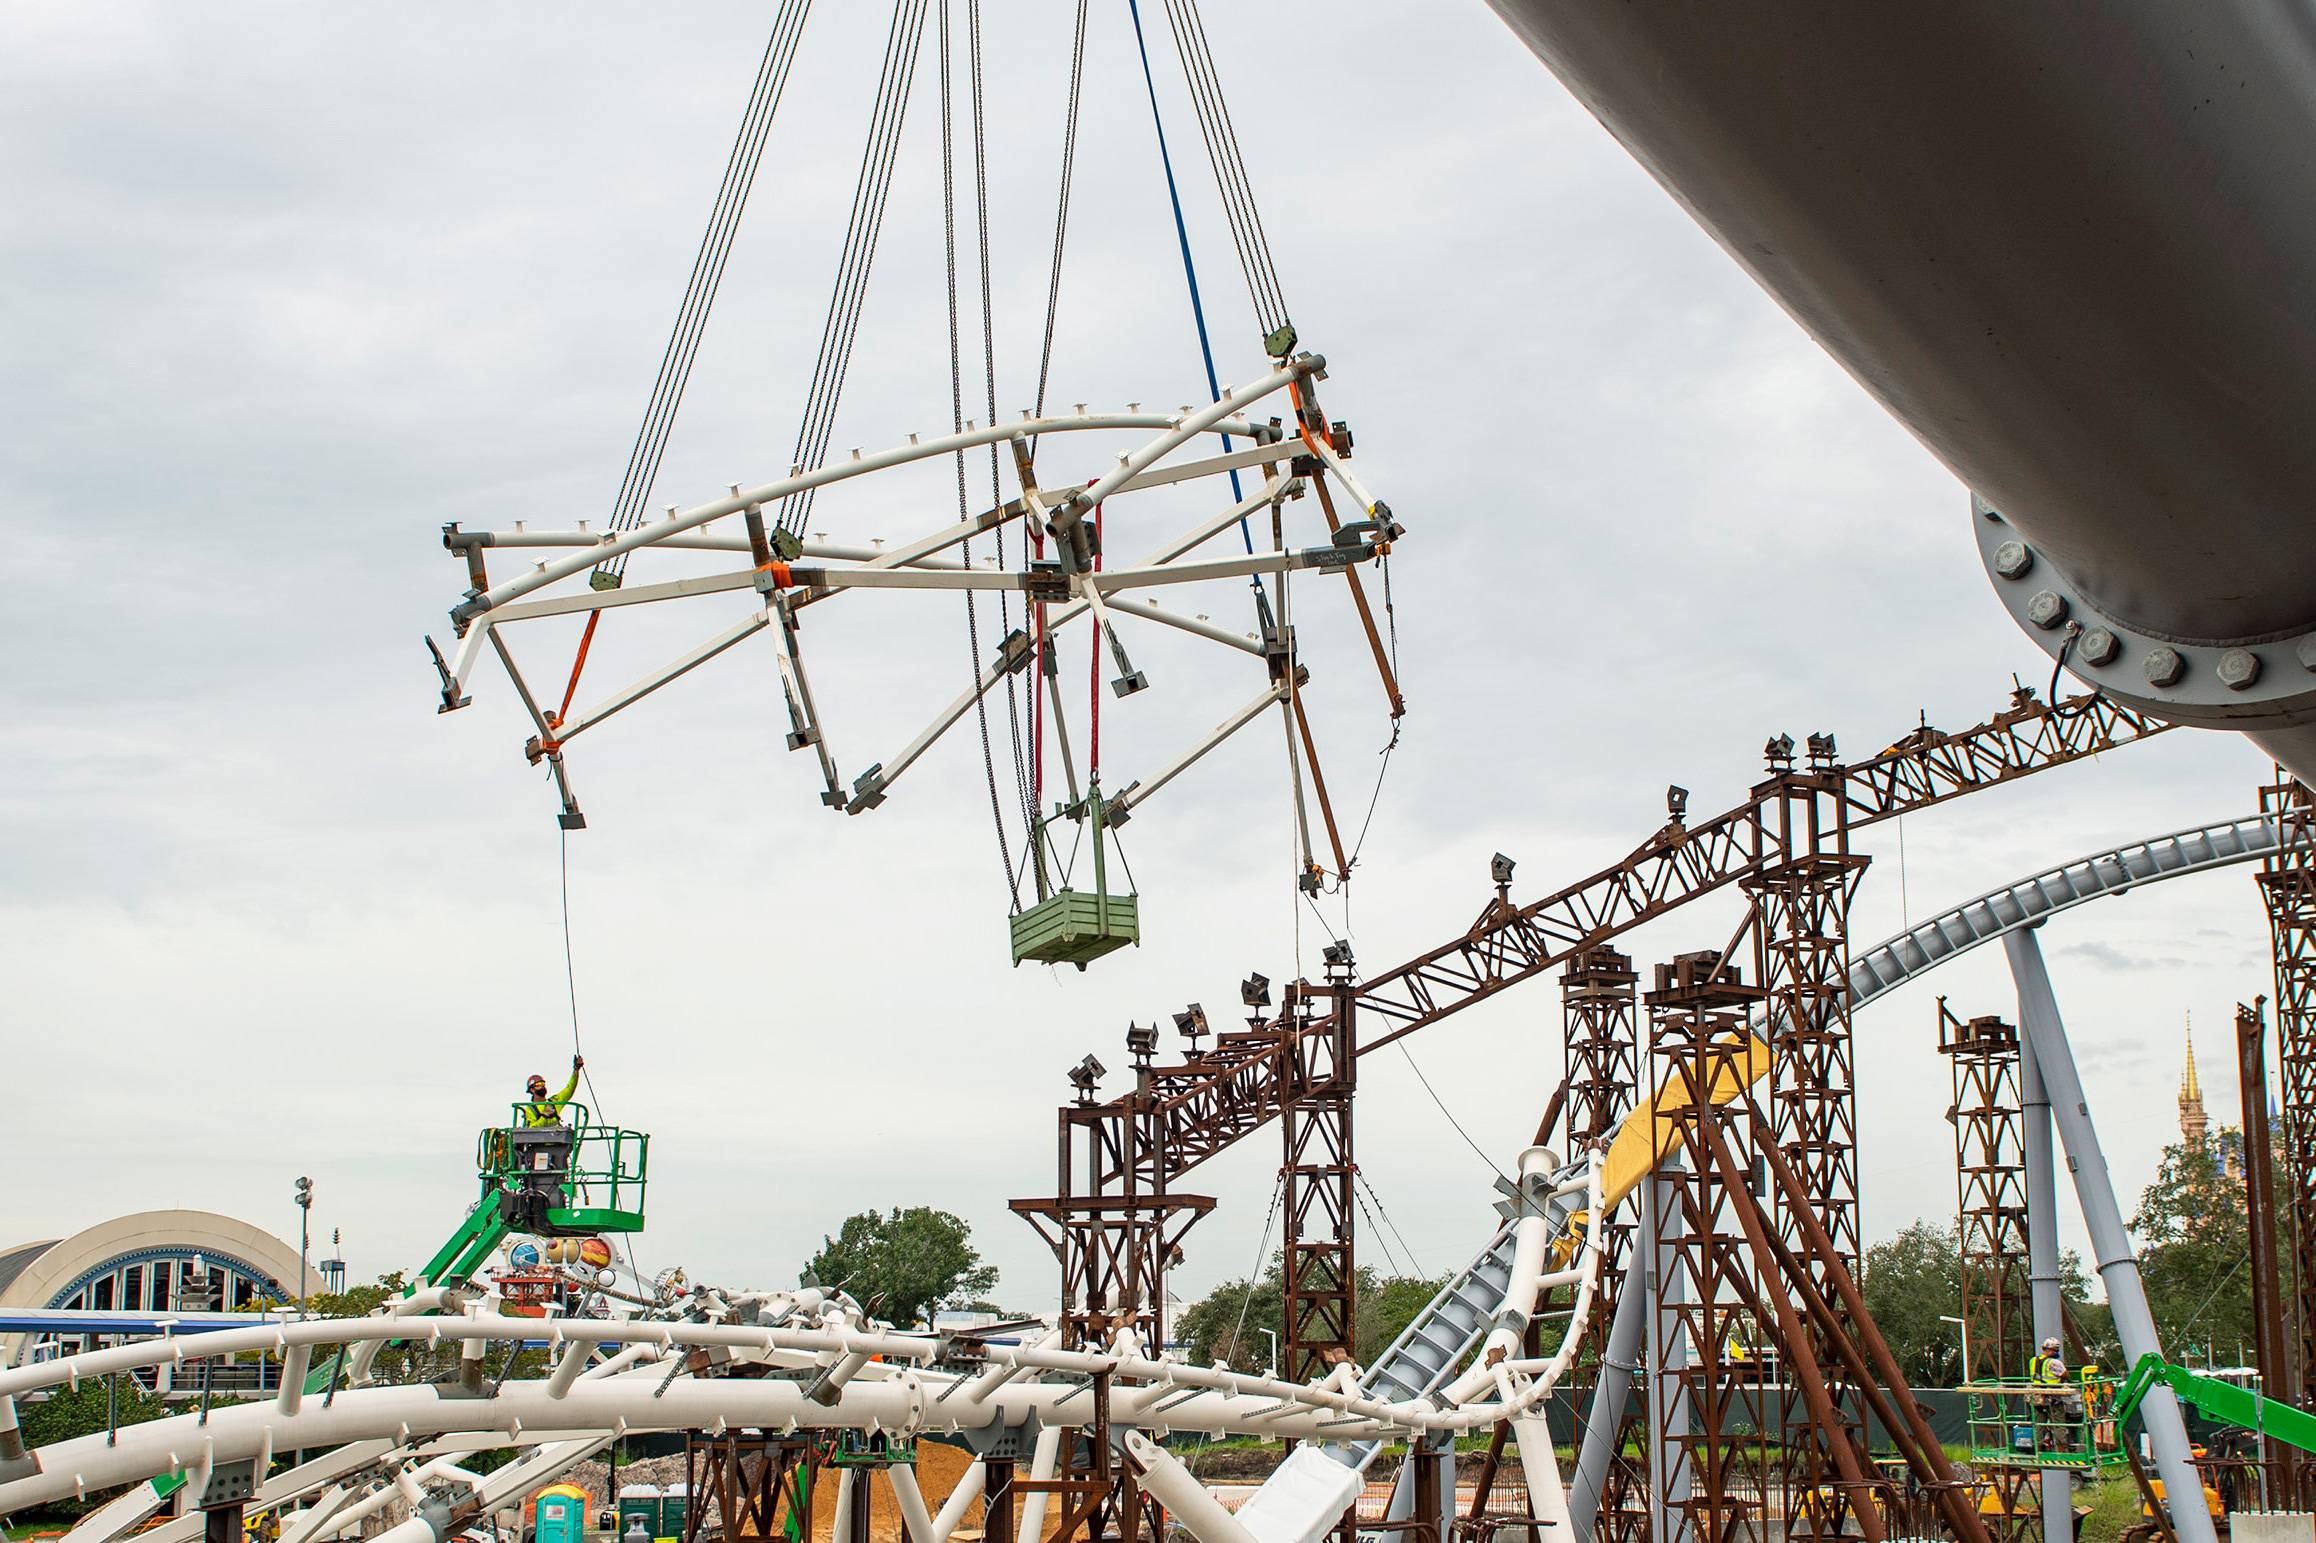 PHOTOS - First piece of the canopy set in place at TRON Lightcyle Run earlier today